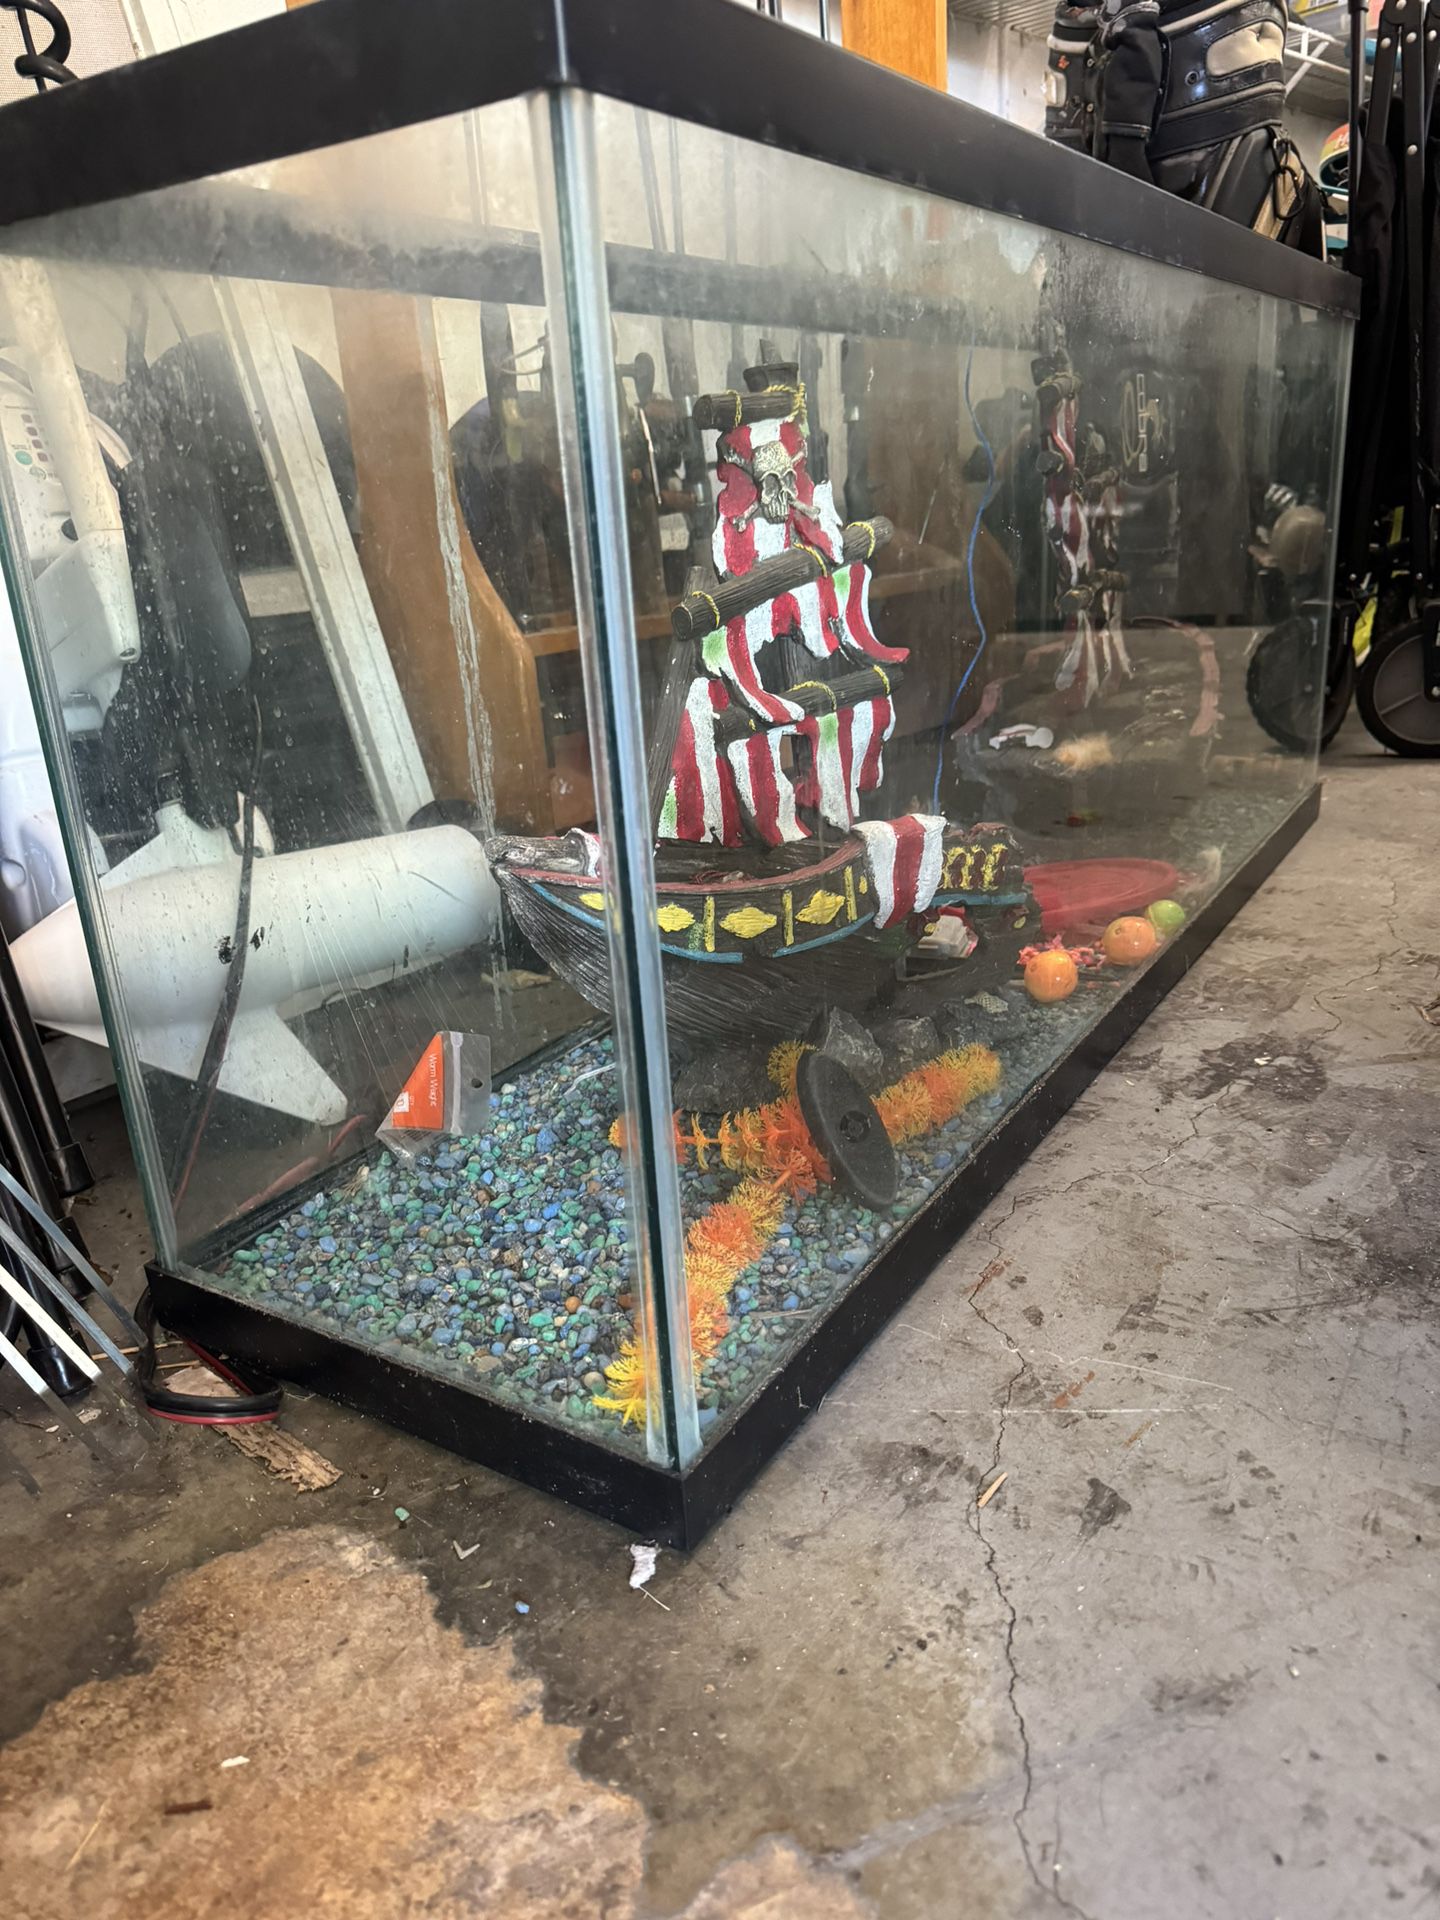 55 Gallon Tank With Pirate Ship